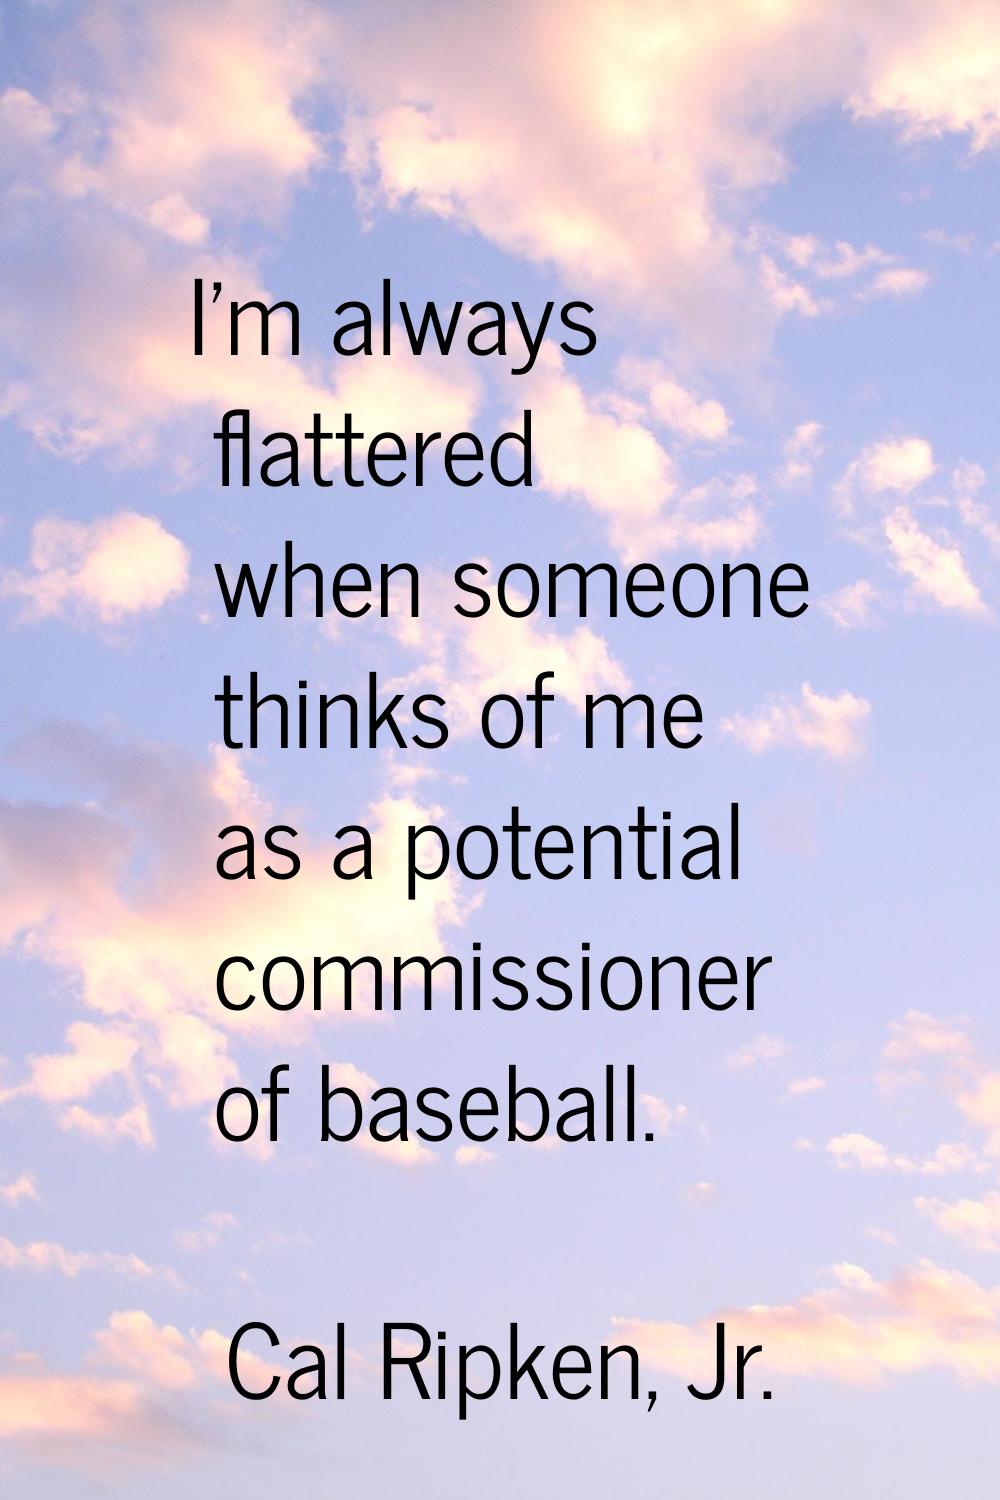 I'm always flattered when someone thinks of me as a potential commissioner of baseball.